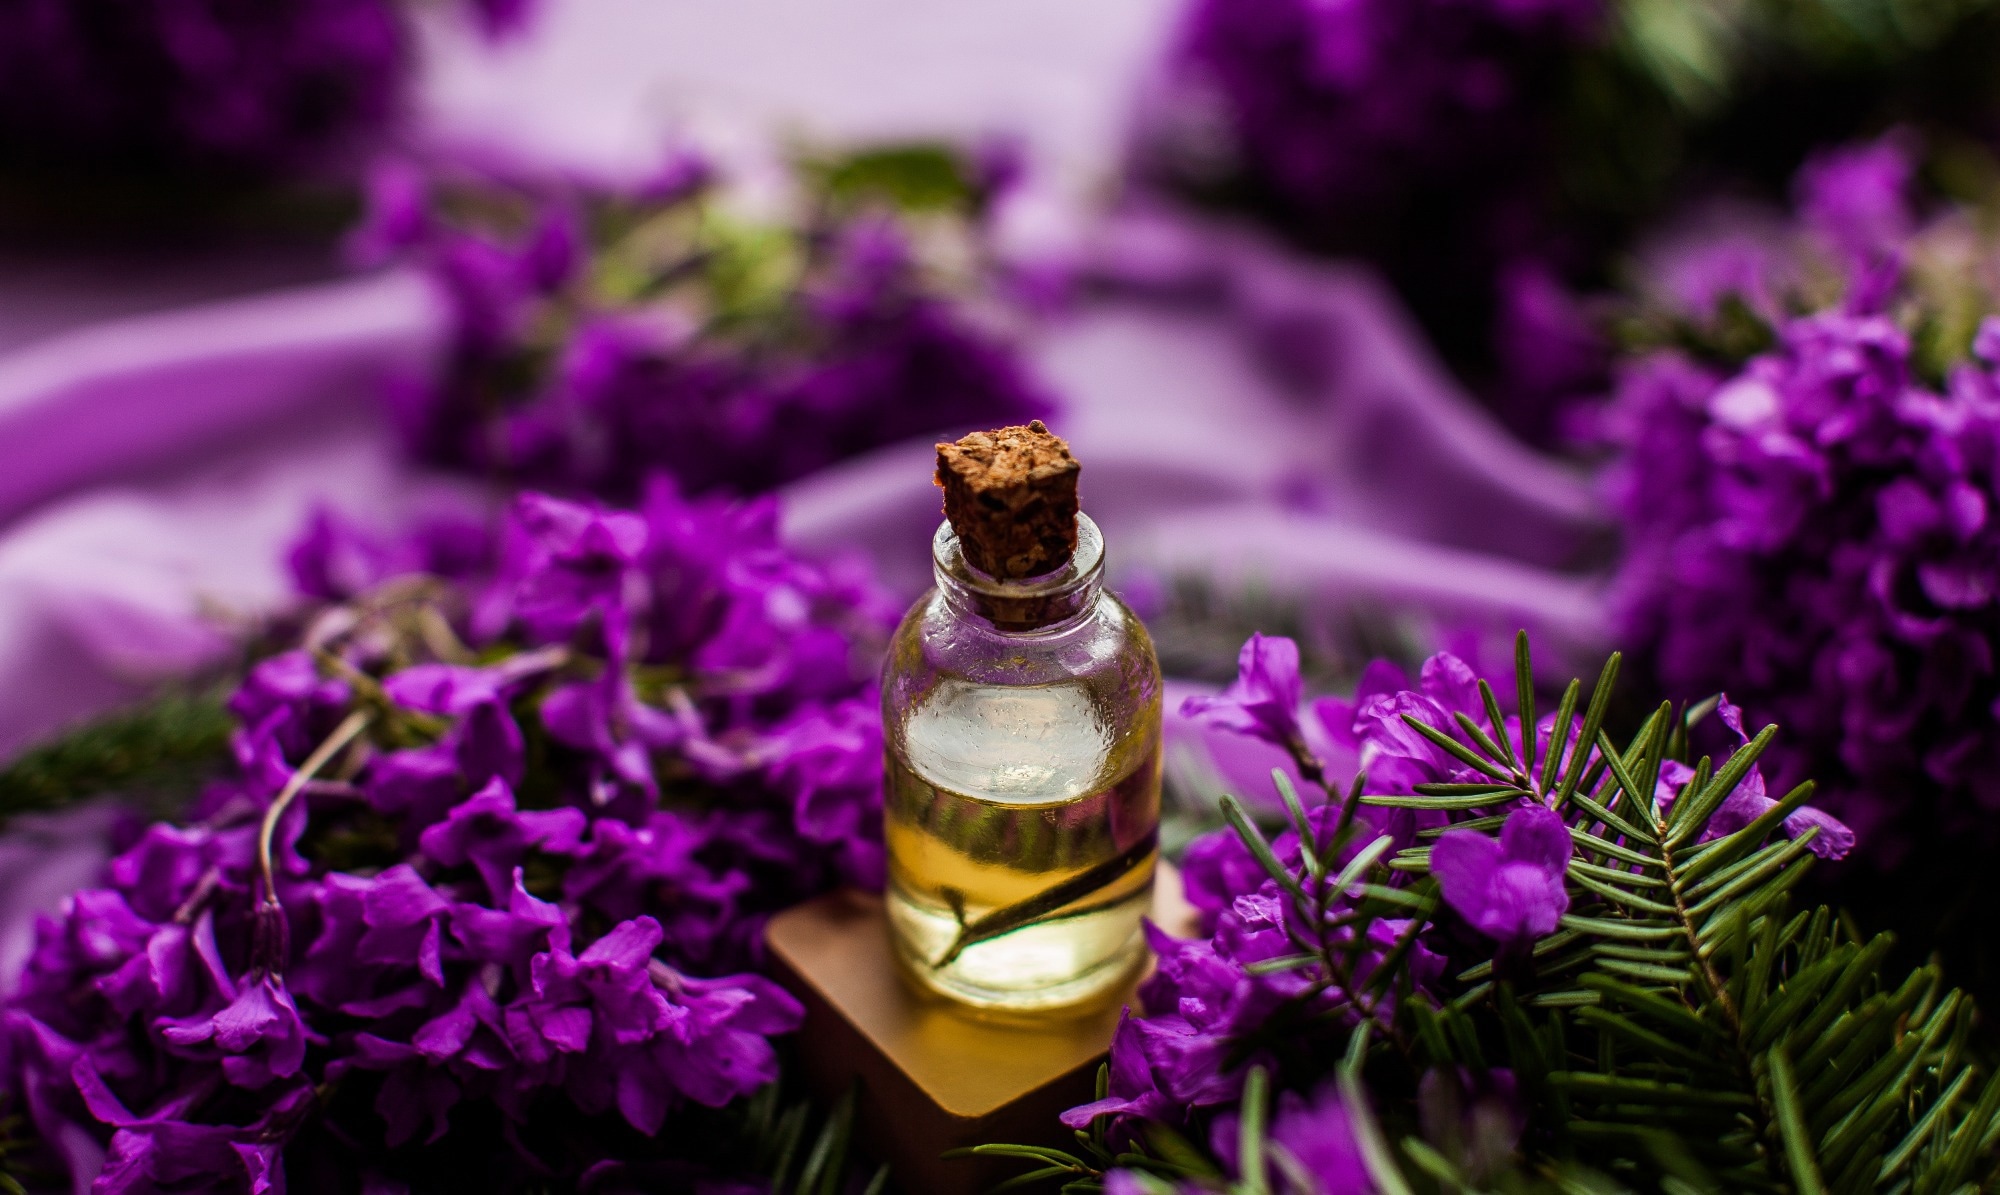 Study: Aromatic oil from lavender as an atopic dermatitis suppressant. Image Credit: PhotoStockPhoto / Shutterstock